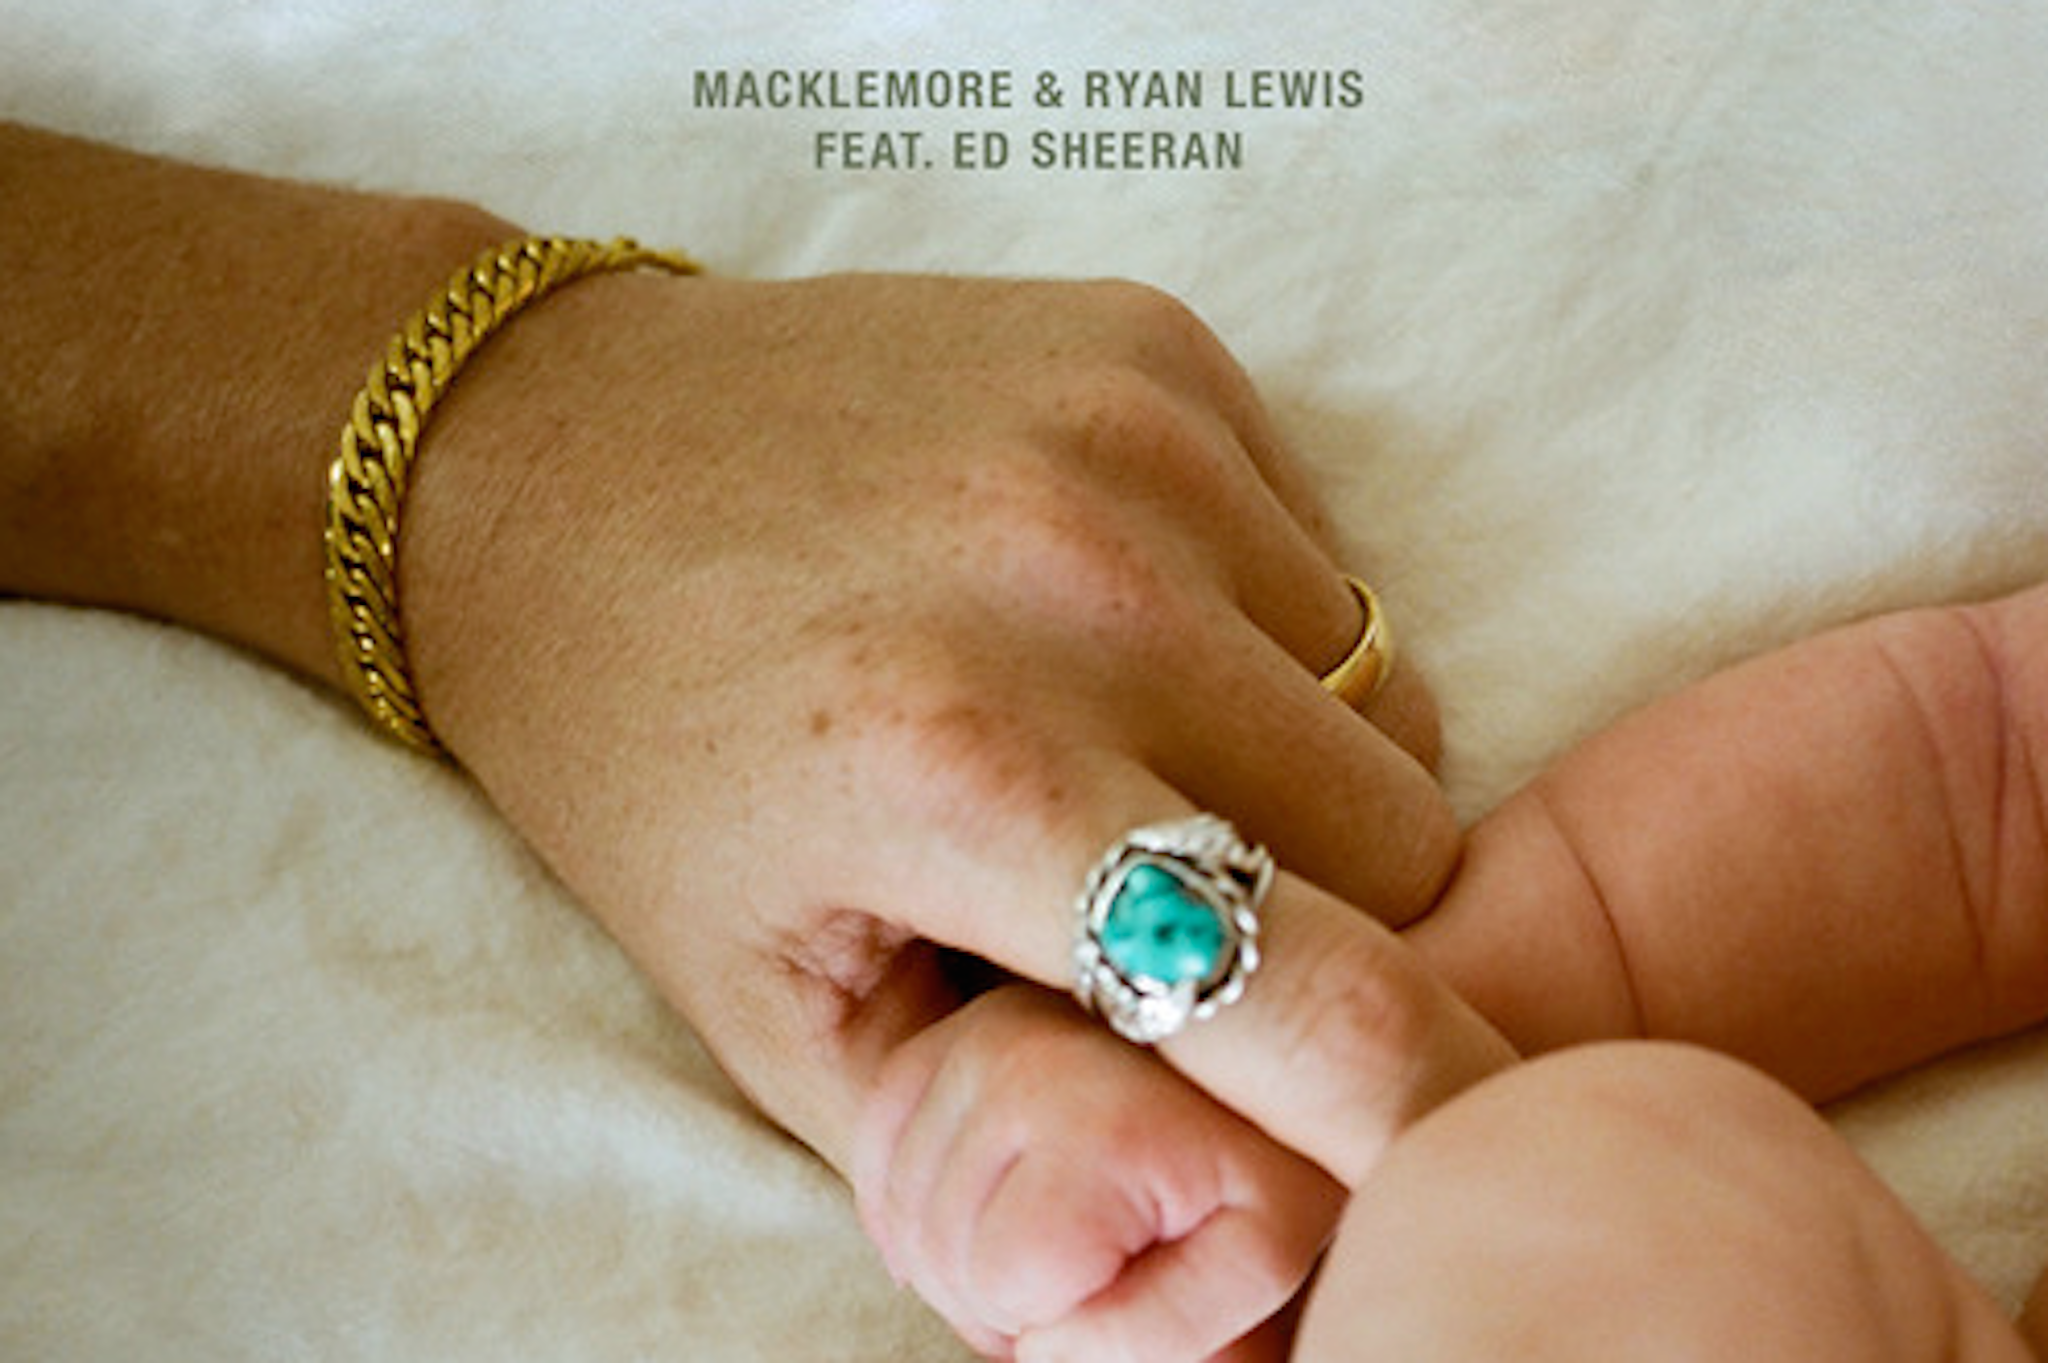 Fans can download 'Growing Up' for free from Macklemore's website